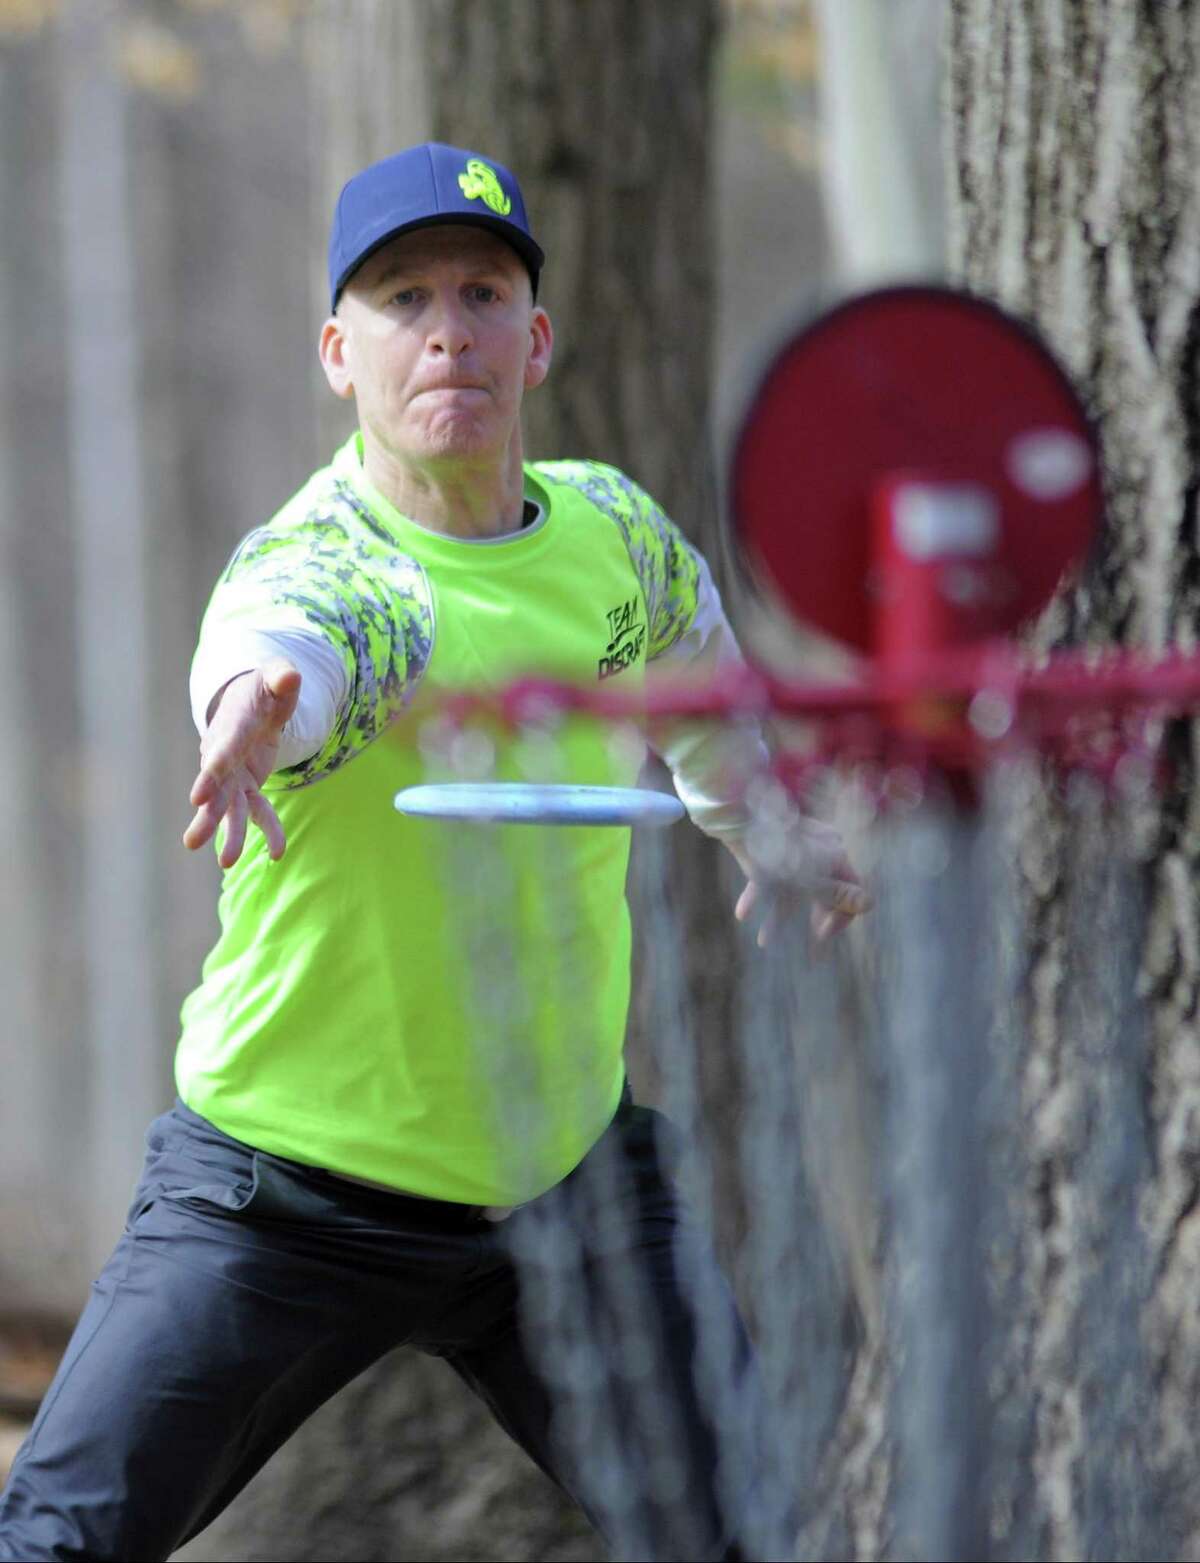 Professional Disc Golfer Adam Goodman of Fairfield forehands the disc at the second hole as he competes in the 2017 Cranbury Ice Bowl, a disc golf charity event at Norwalk's Cranbury Park on Feb. 25. A mix of professional and amateur disc golf players participated in the two round 18-hole tournament, raising over $2500.00 in cash/can food donations that will benefit the Norwalk food shelter. It's the disc golfers way of saying thanks to the city of Norwalk for all the support over years.